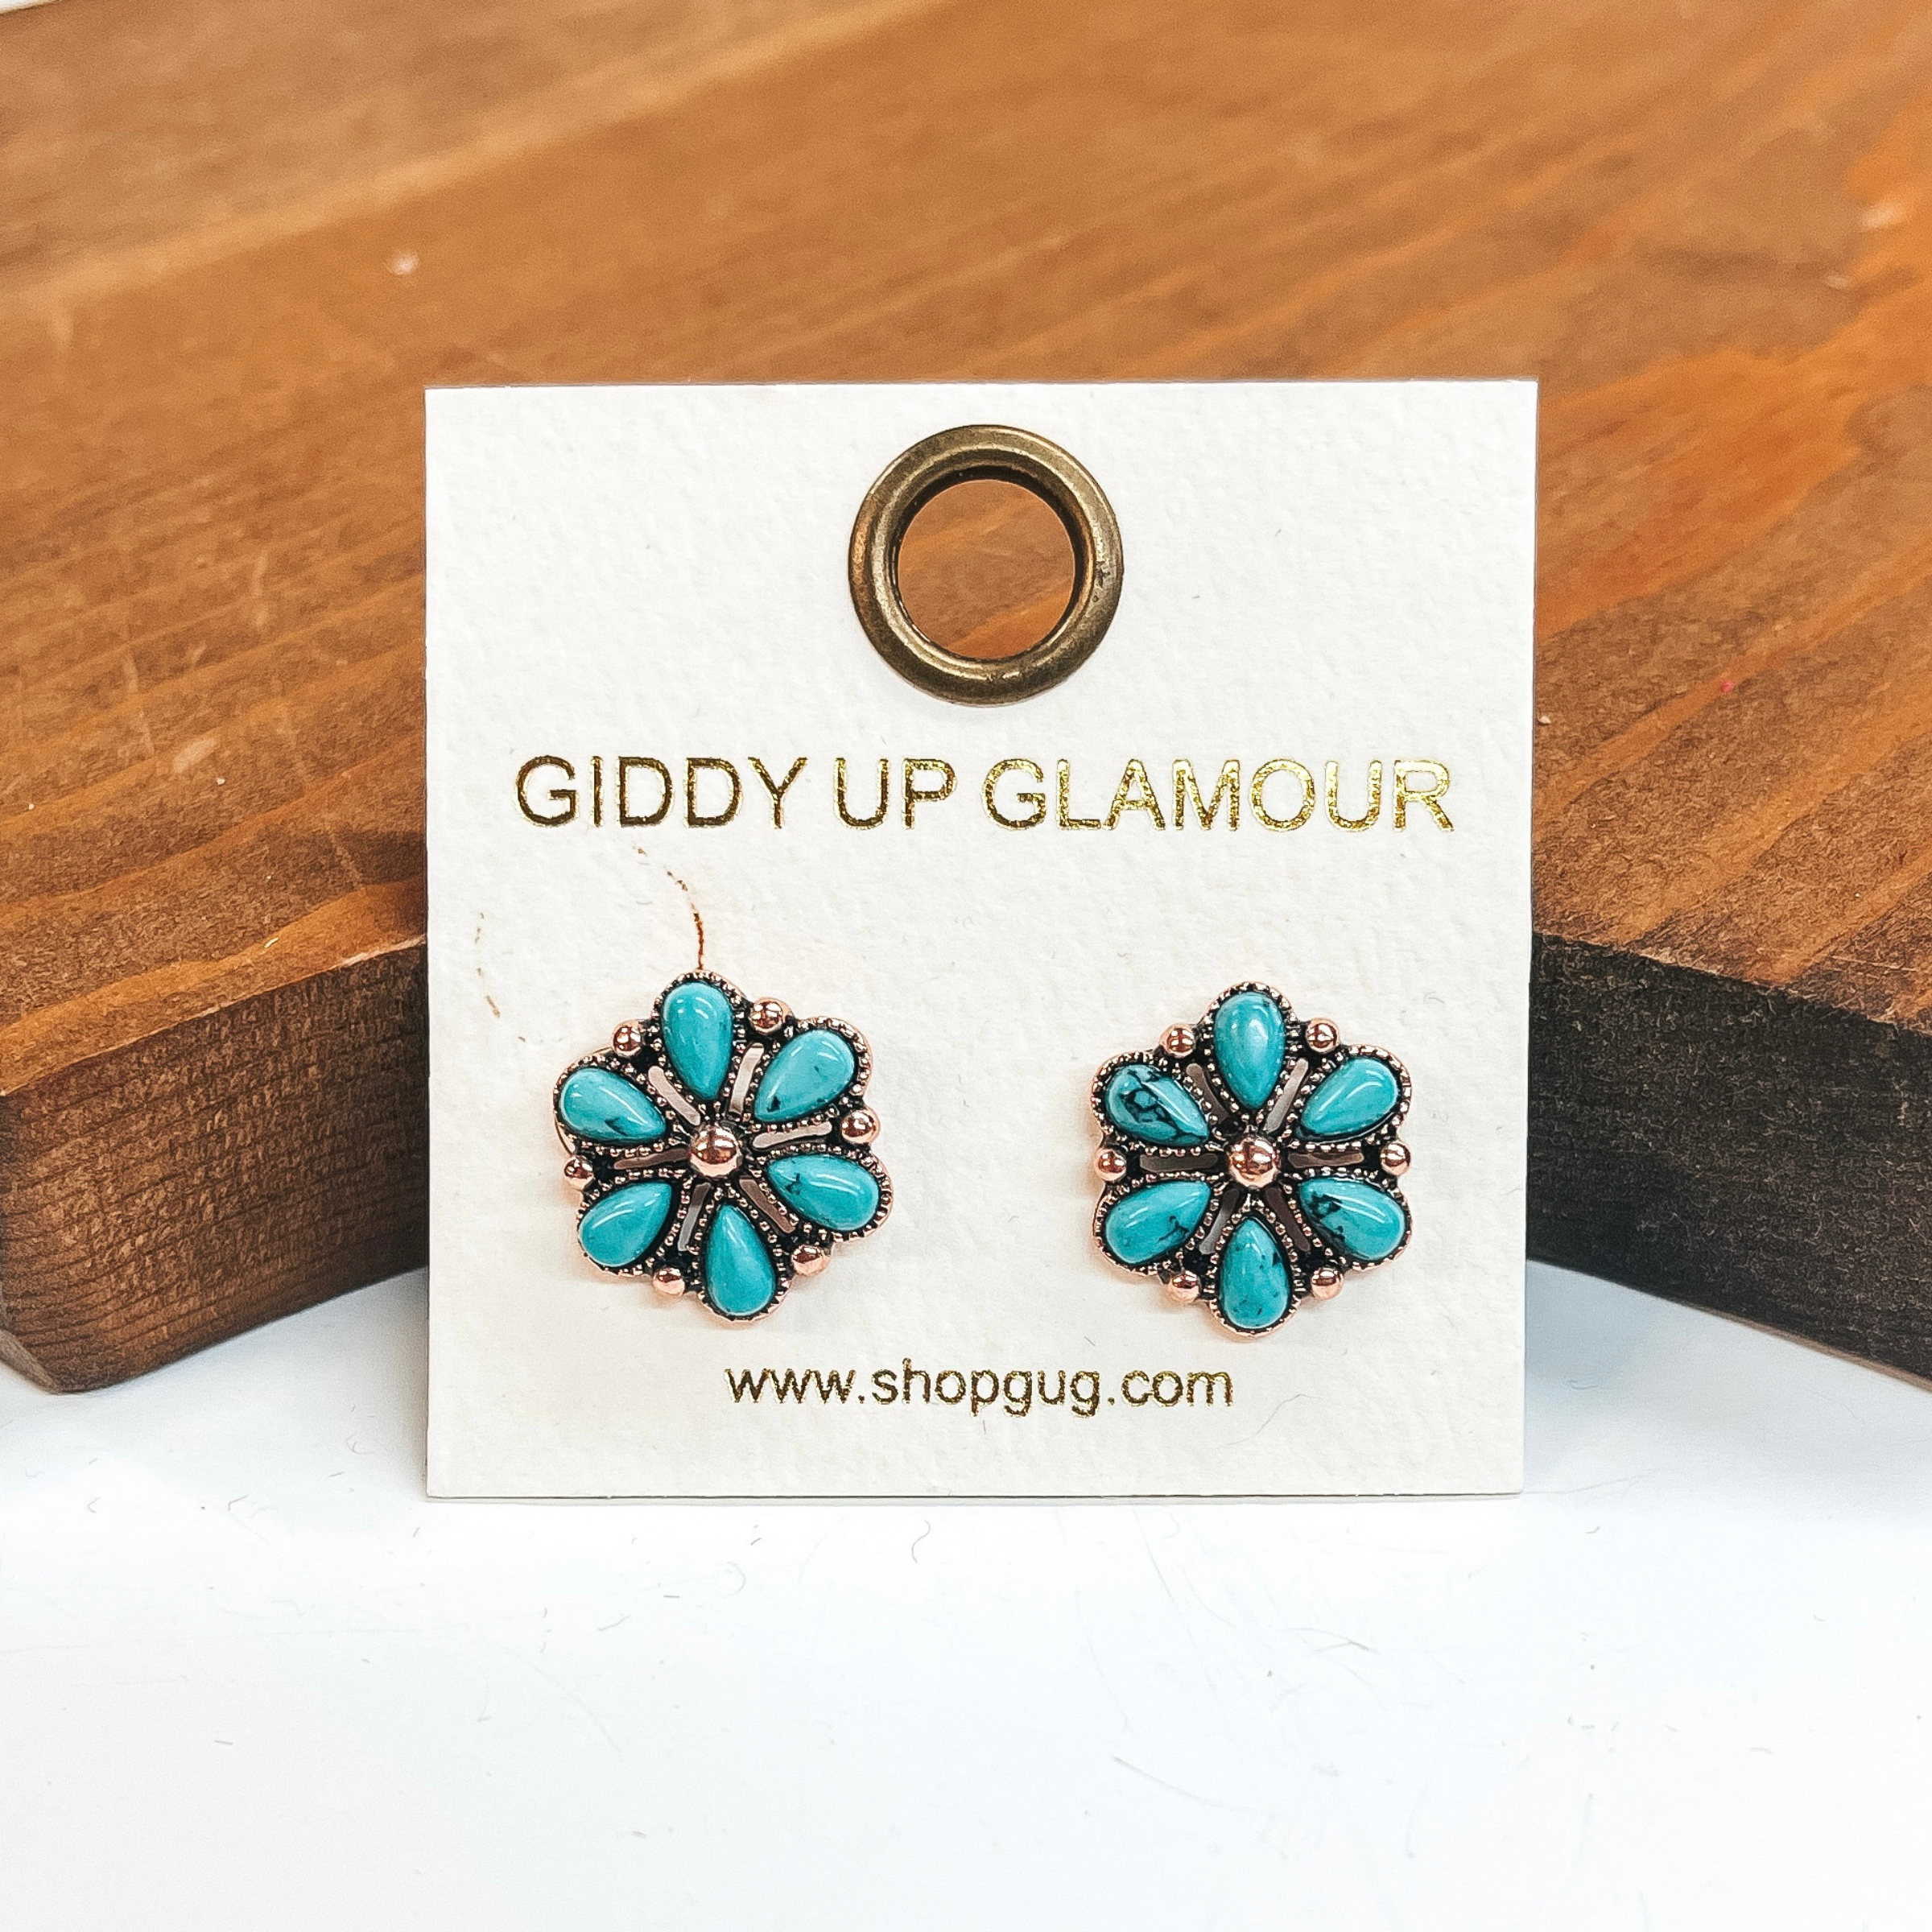 Copper flower earrings that include turquoise stones.  These earrings are taken on a white background and leaned up against a brown block.